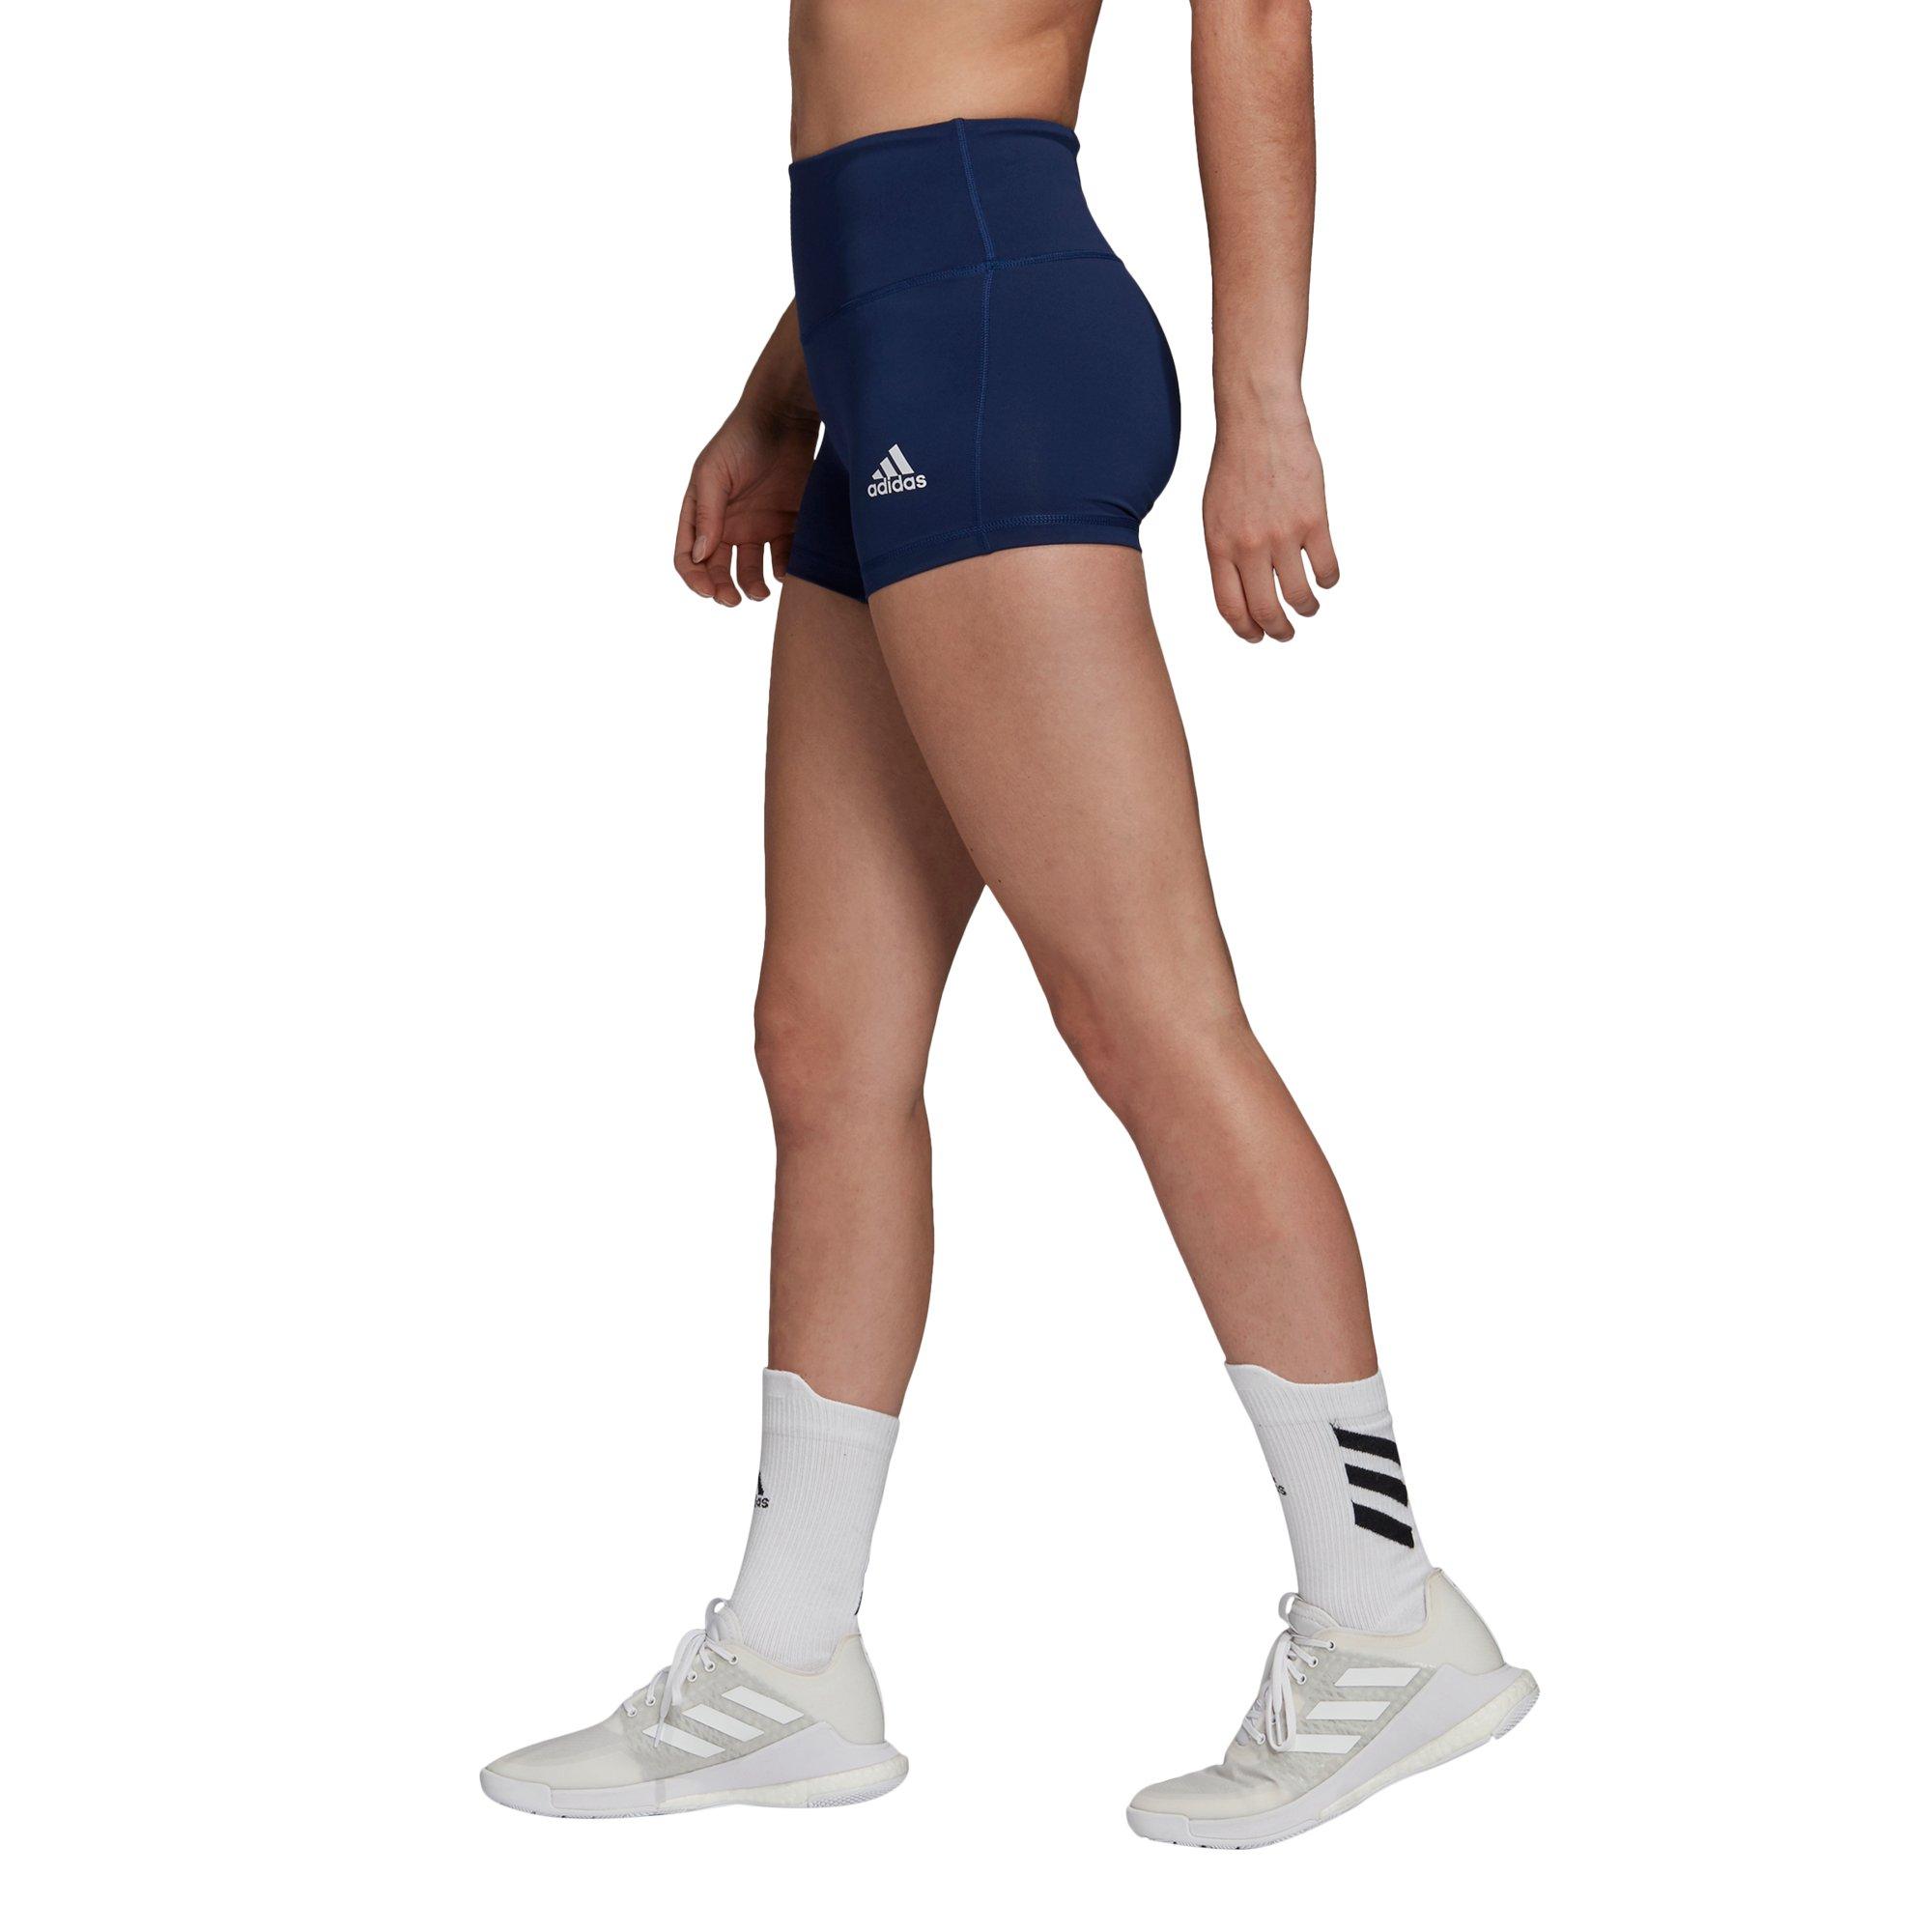 Adidas Women's Techfit Volleyball Tights